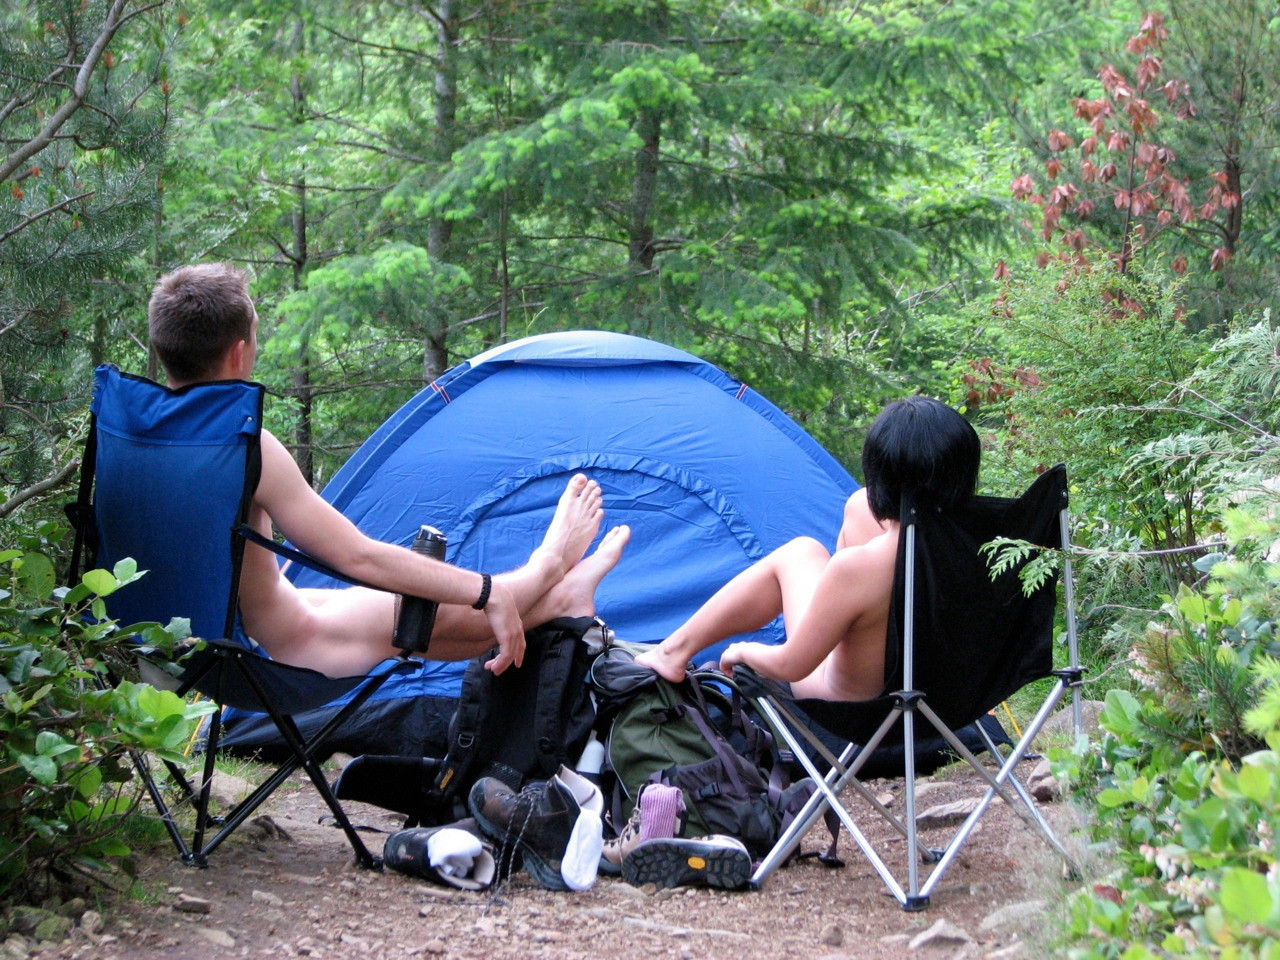 heartlandnaturists:  Nude camping is awesome!  There’s nothing like getting to